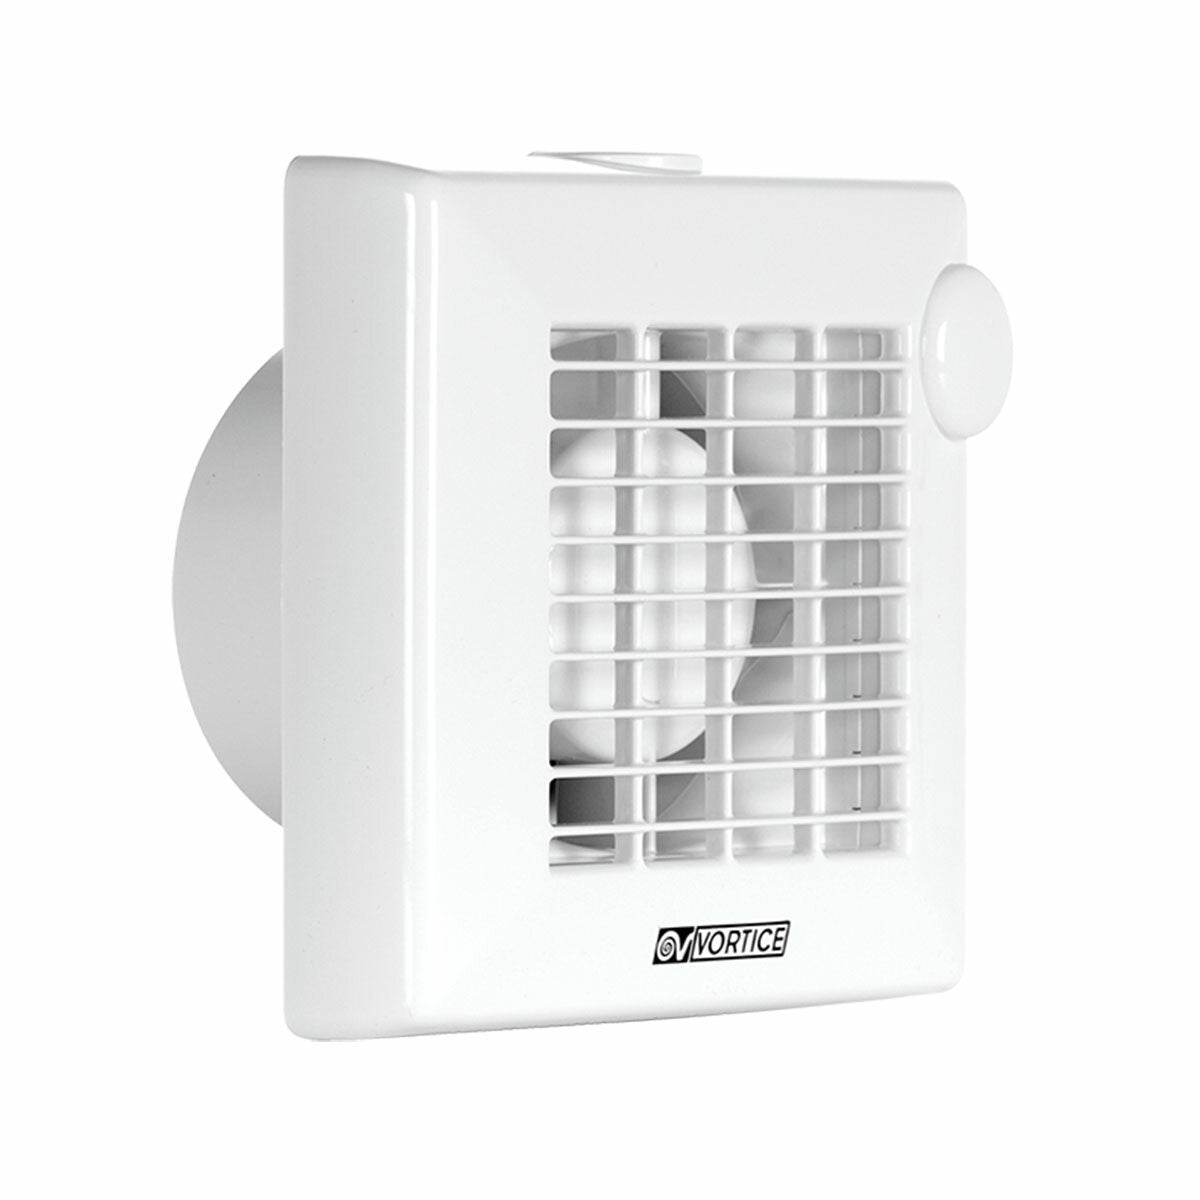 Vortice M 120/5" wall-mounted extractor